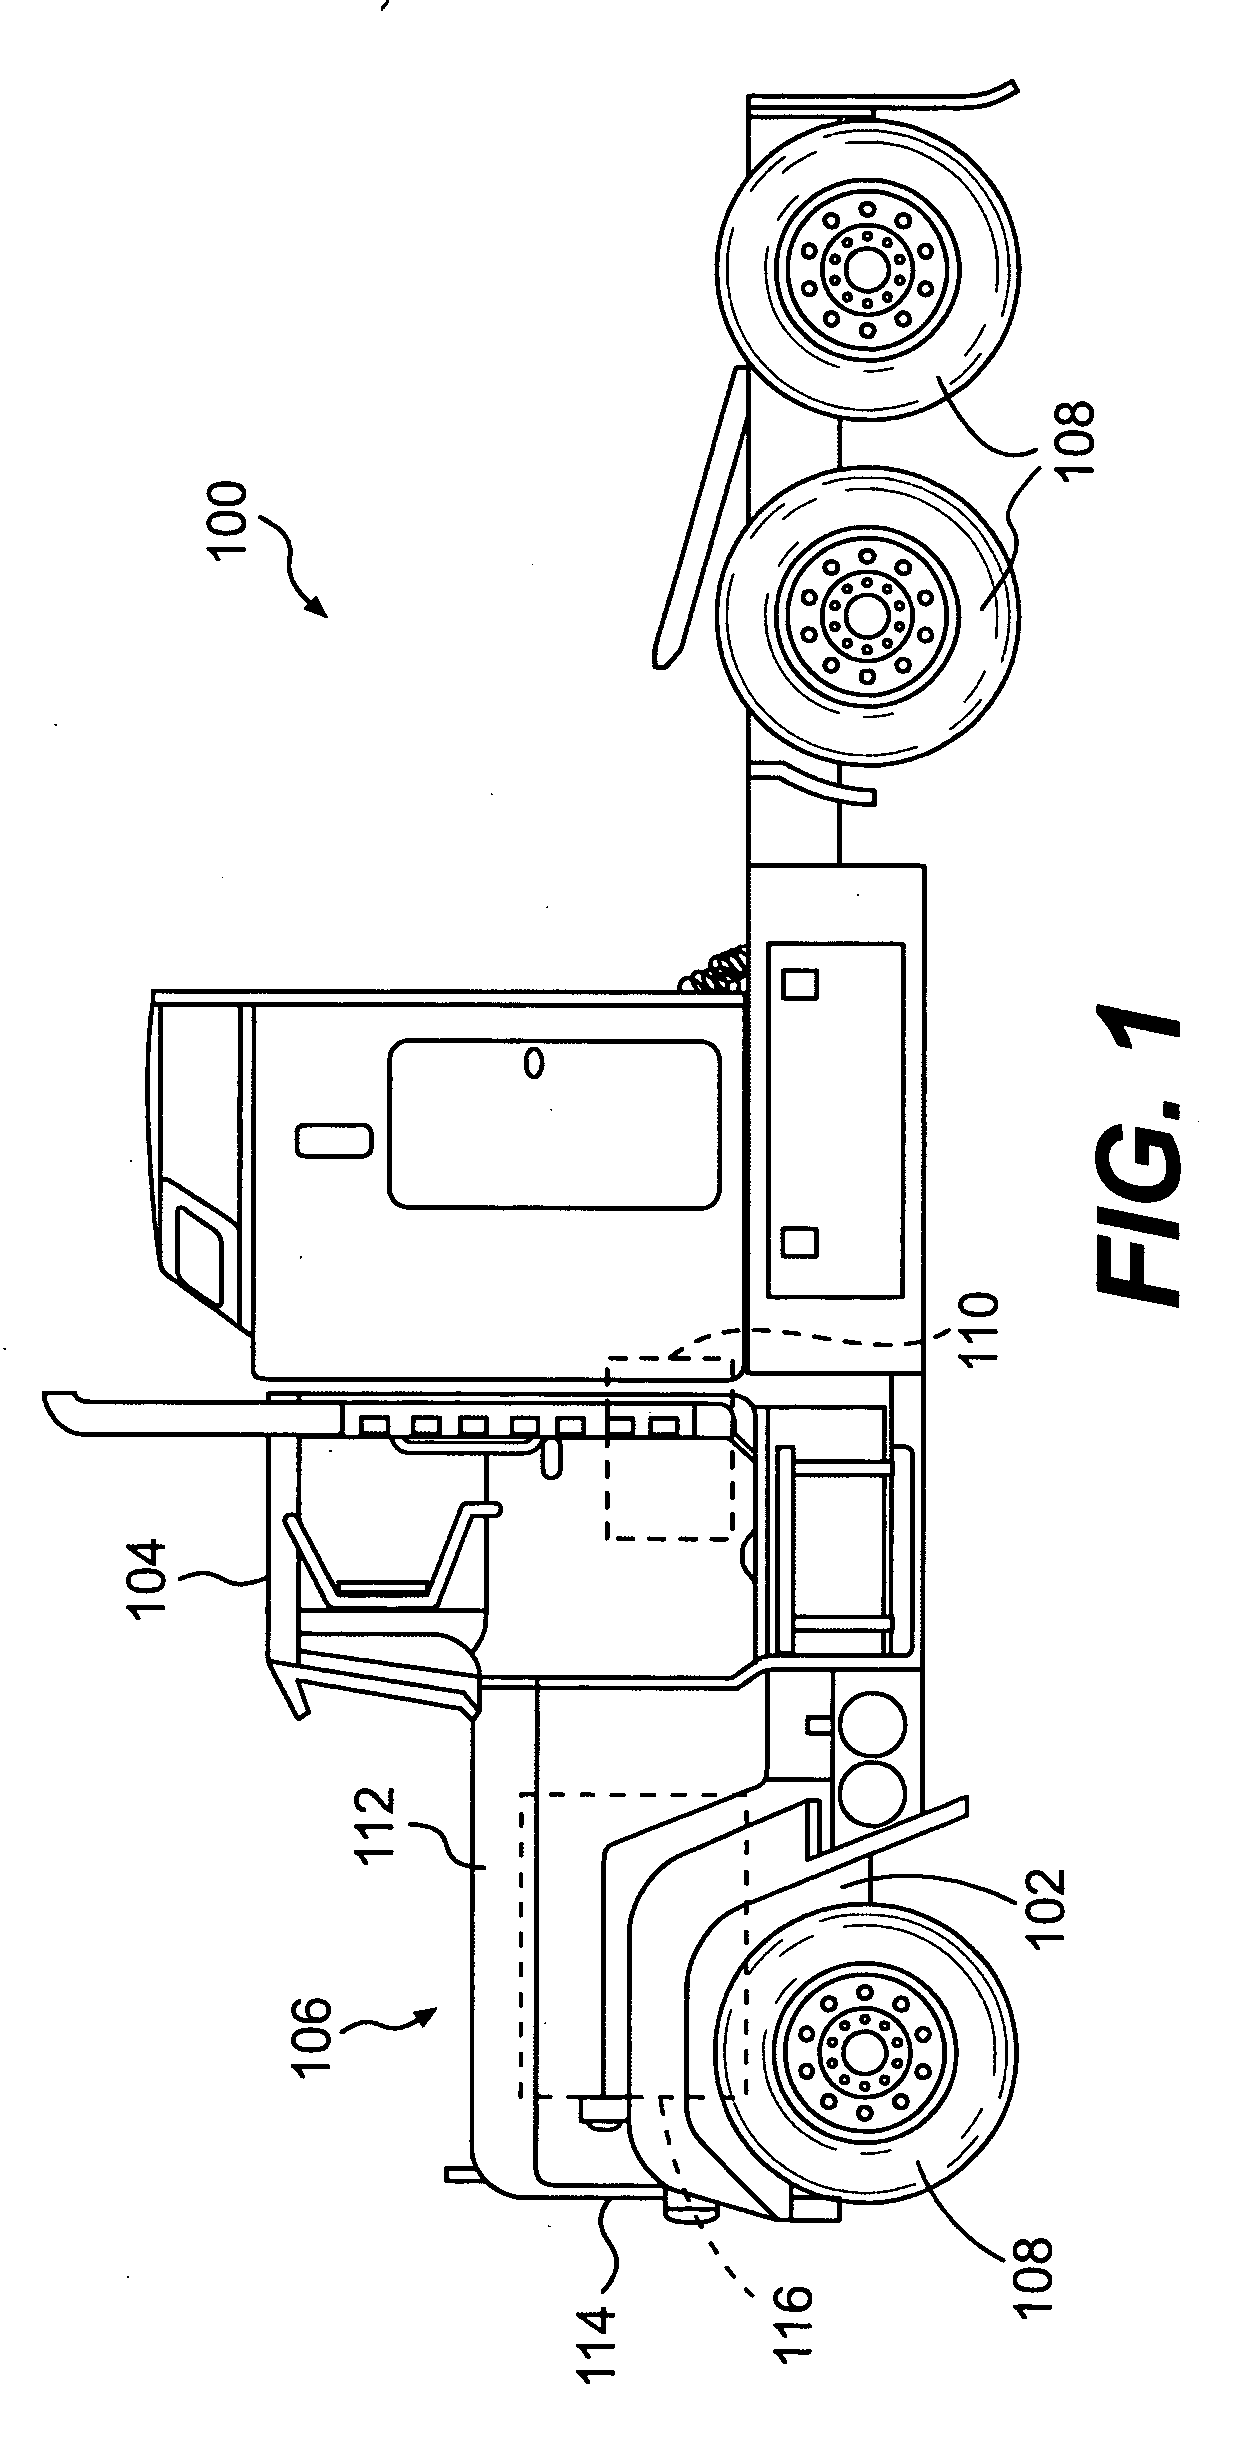 Air-conditioning assembly